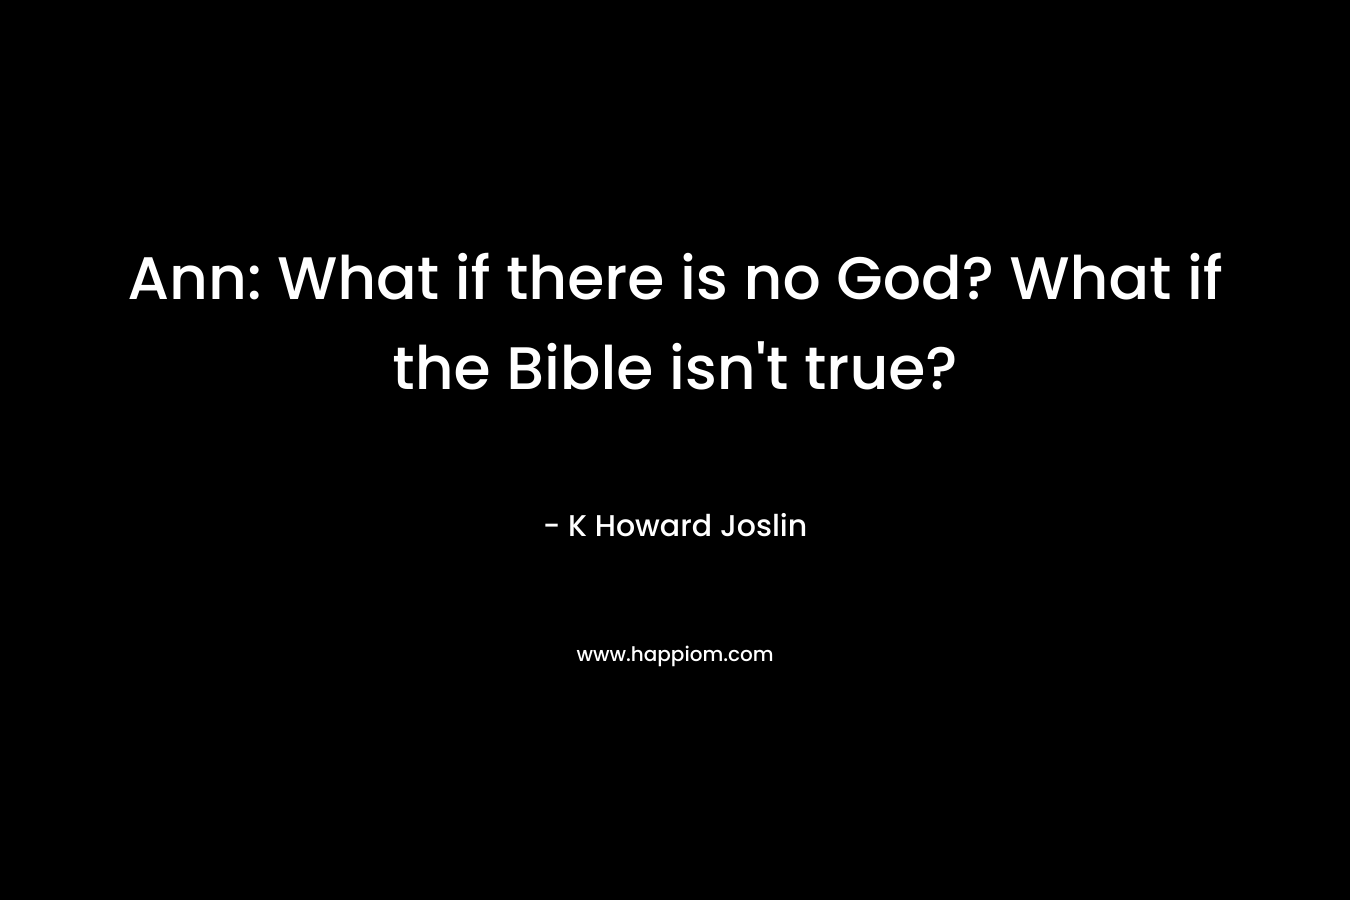 Ann: What if there is no God? What if the Bible isn't true?